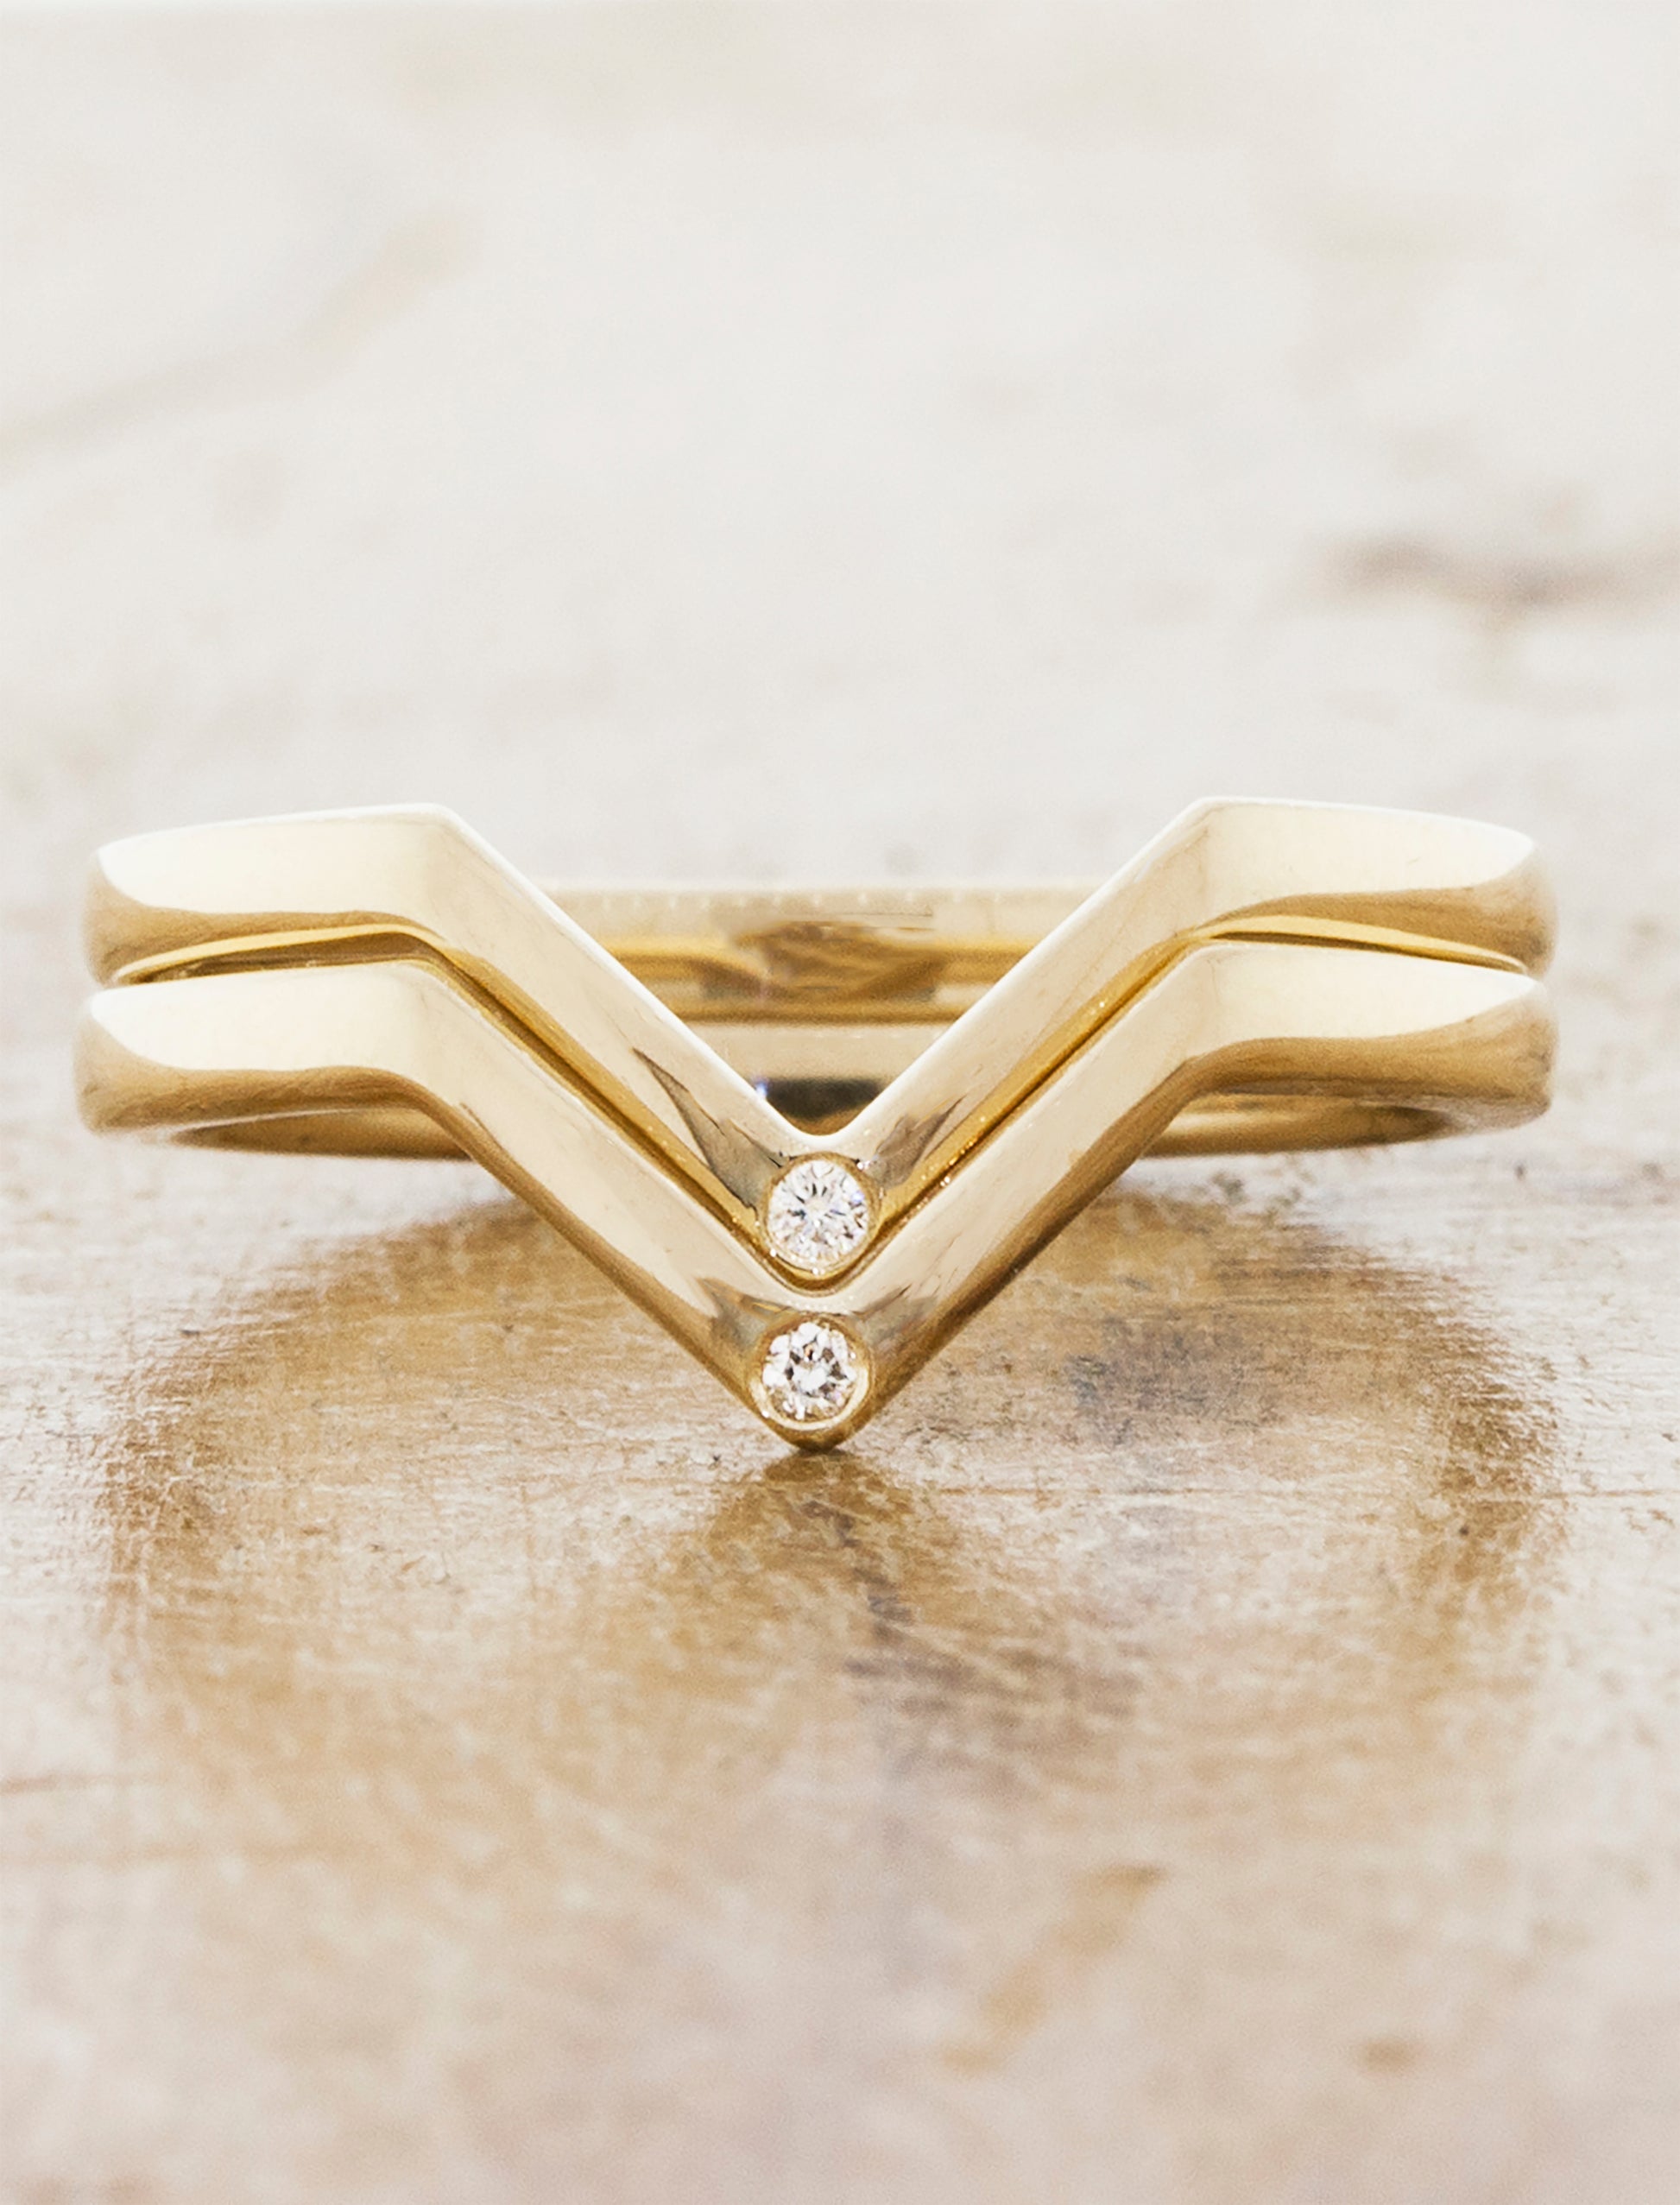 Puzzle piece fit wedding band;caption:Marie Wedding Bands Pictured in 14k Yellow Gold with Diamonds 